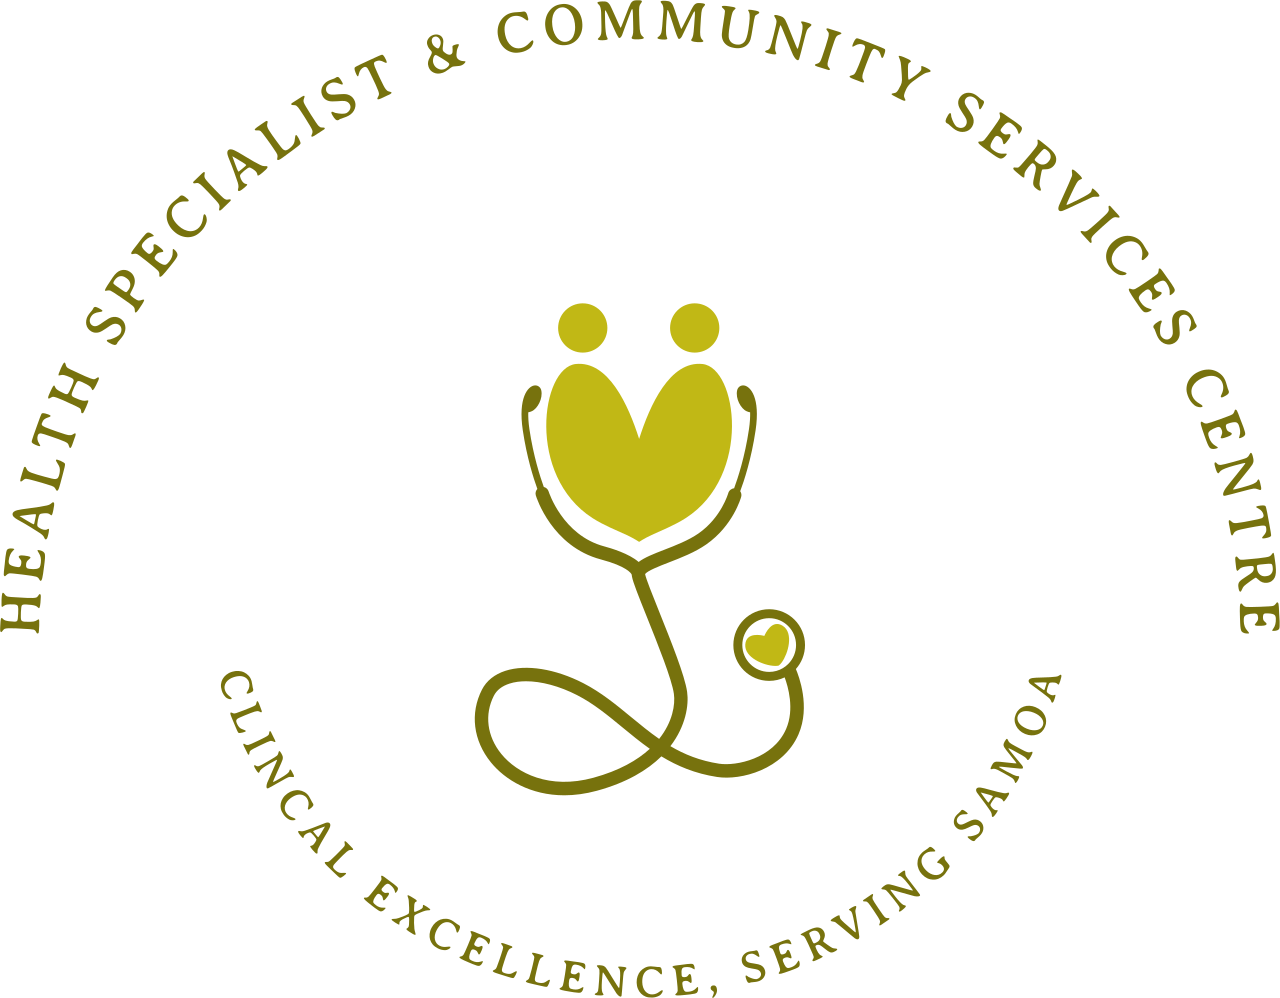 Health Specialist & Community Services